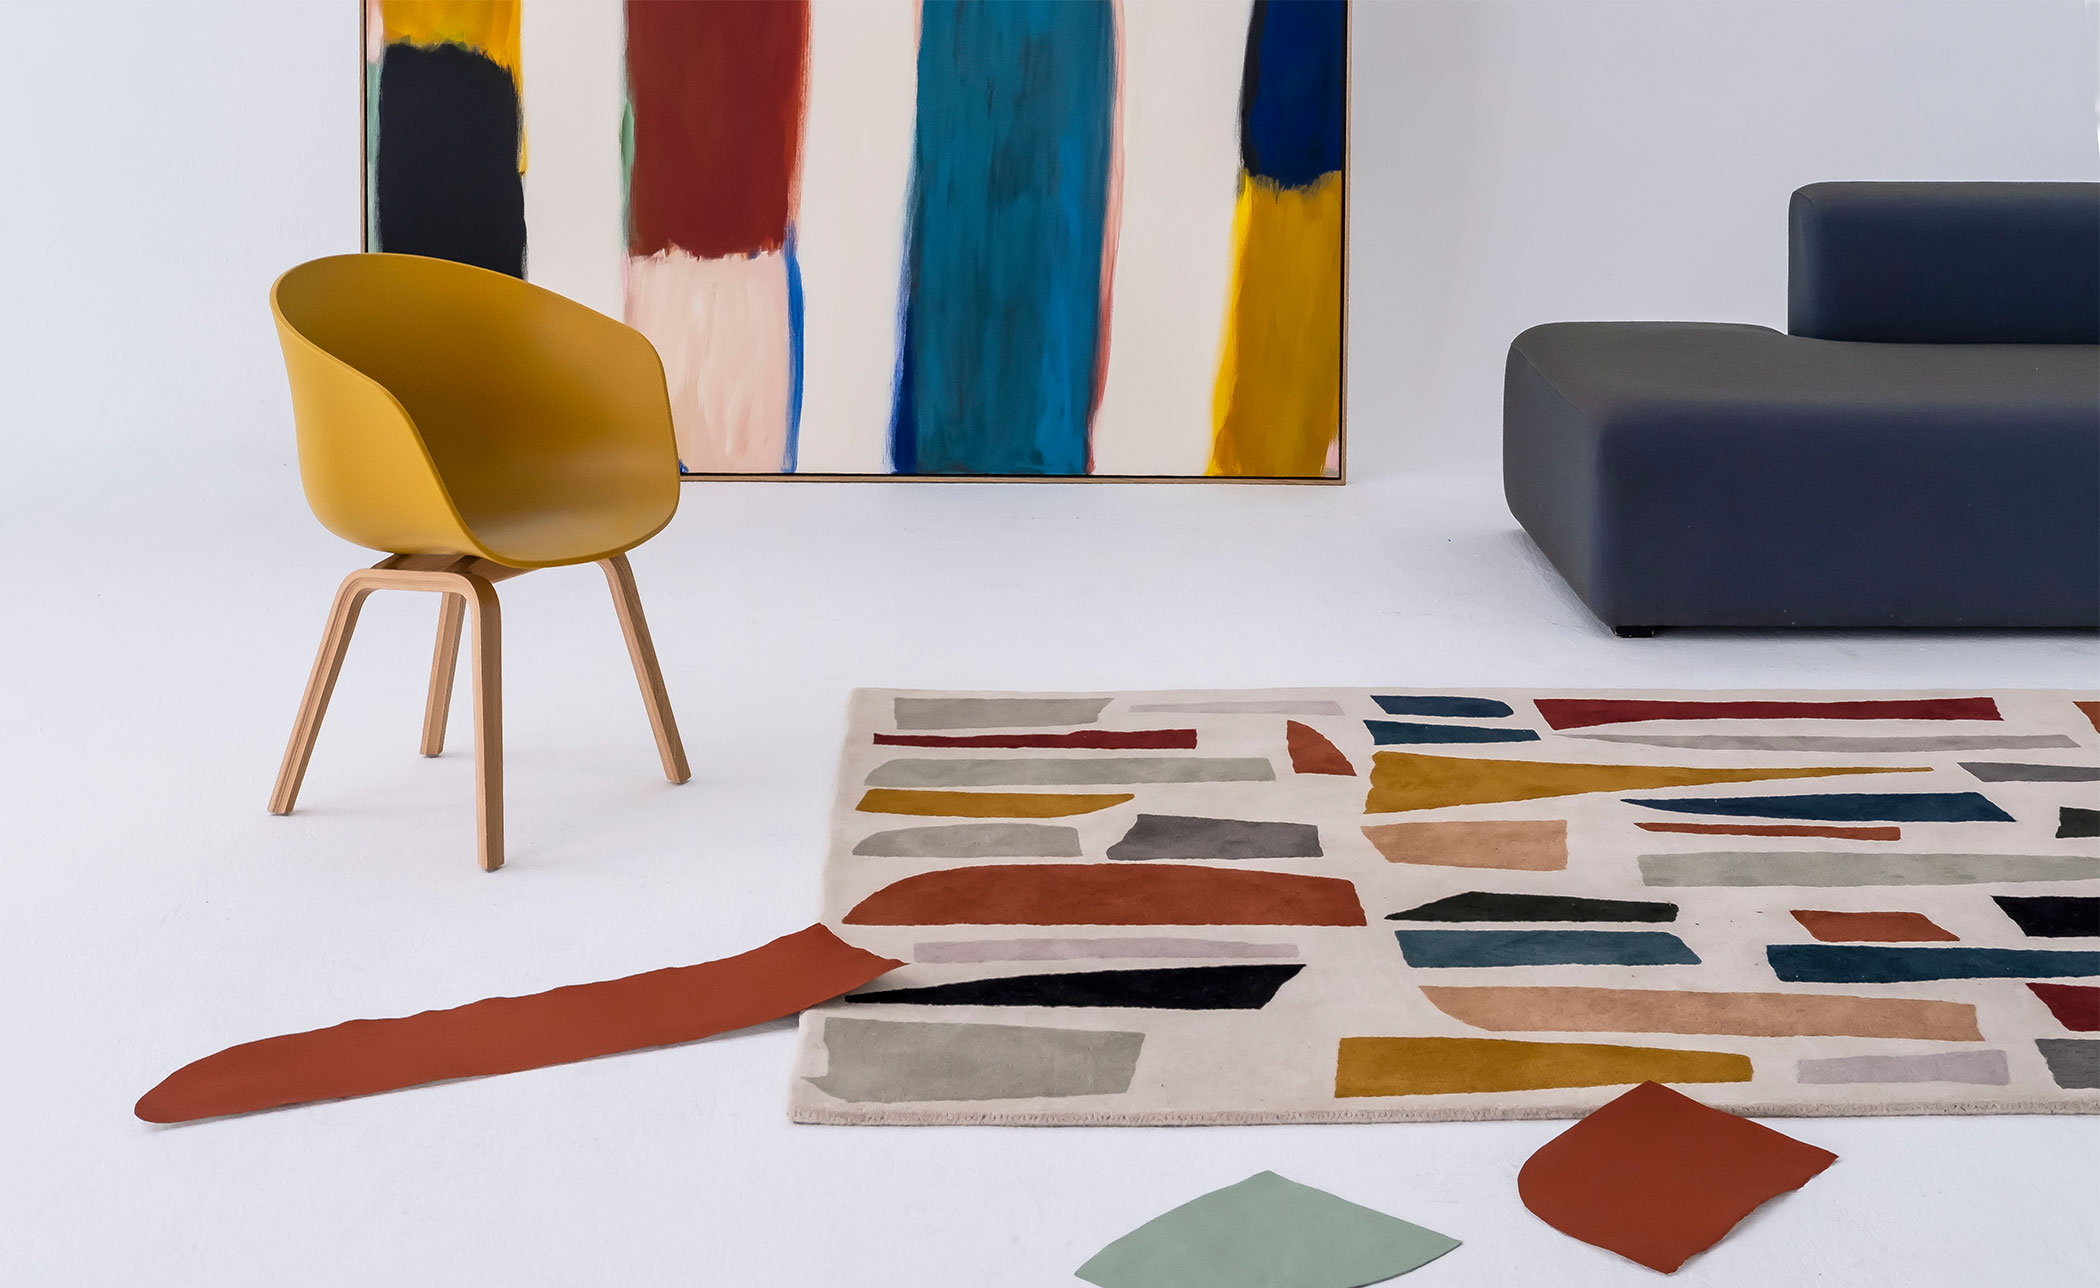 Tones Pieces Tufting Rug by Claudia Valsells for Nanimarquina